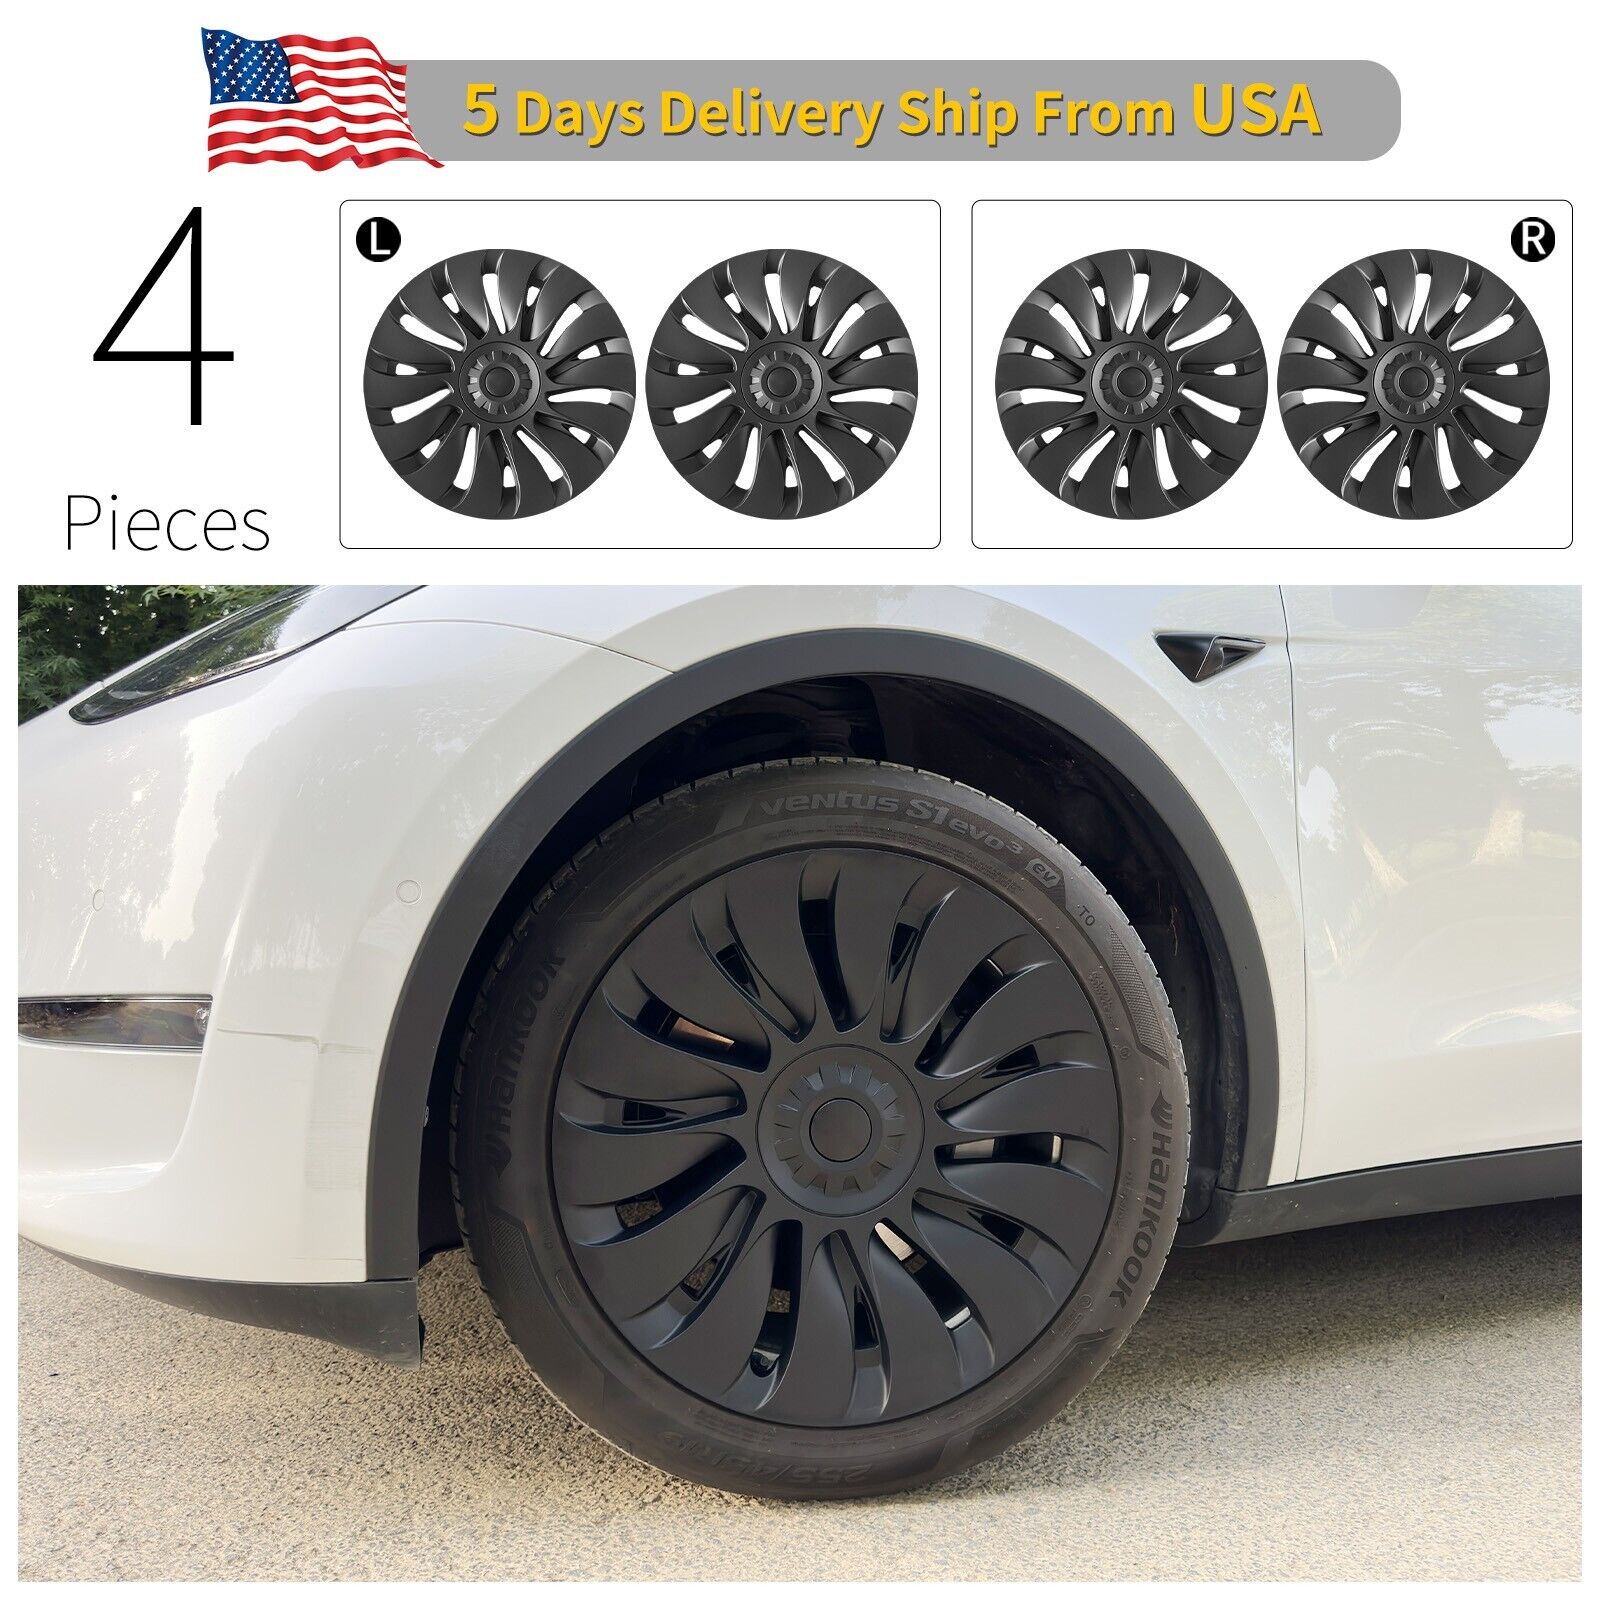 4PCS Hubcaps For Tesla Model Y Wheel Cover Full Rim 19 inch Storm Hubcaps Cover